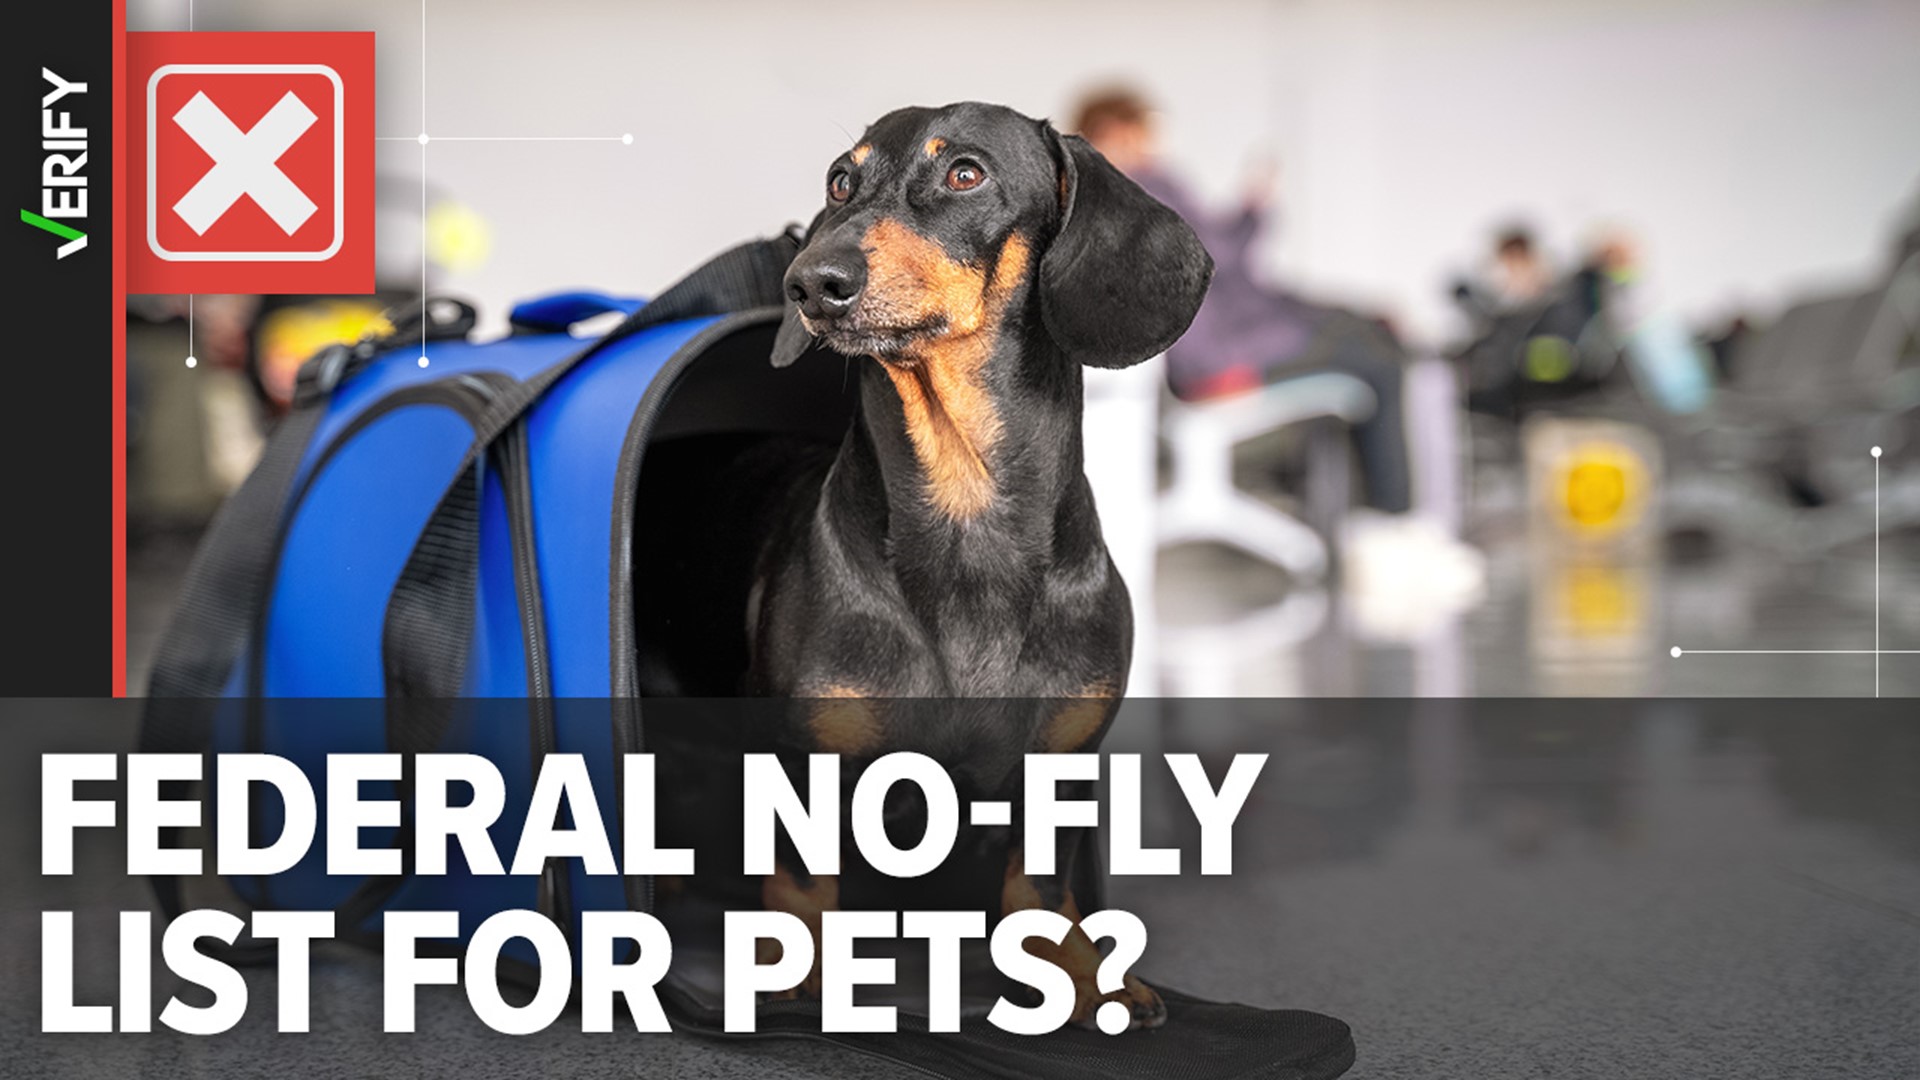 Airlines can deny a pet from boarding at their discretion. However, there is not a no-fly list maintained by the FAA, despite claims from unhappy travelers.